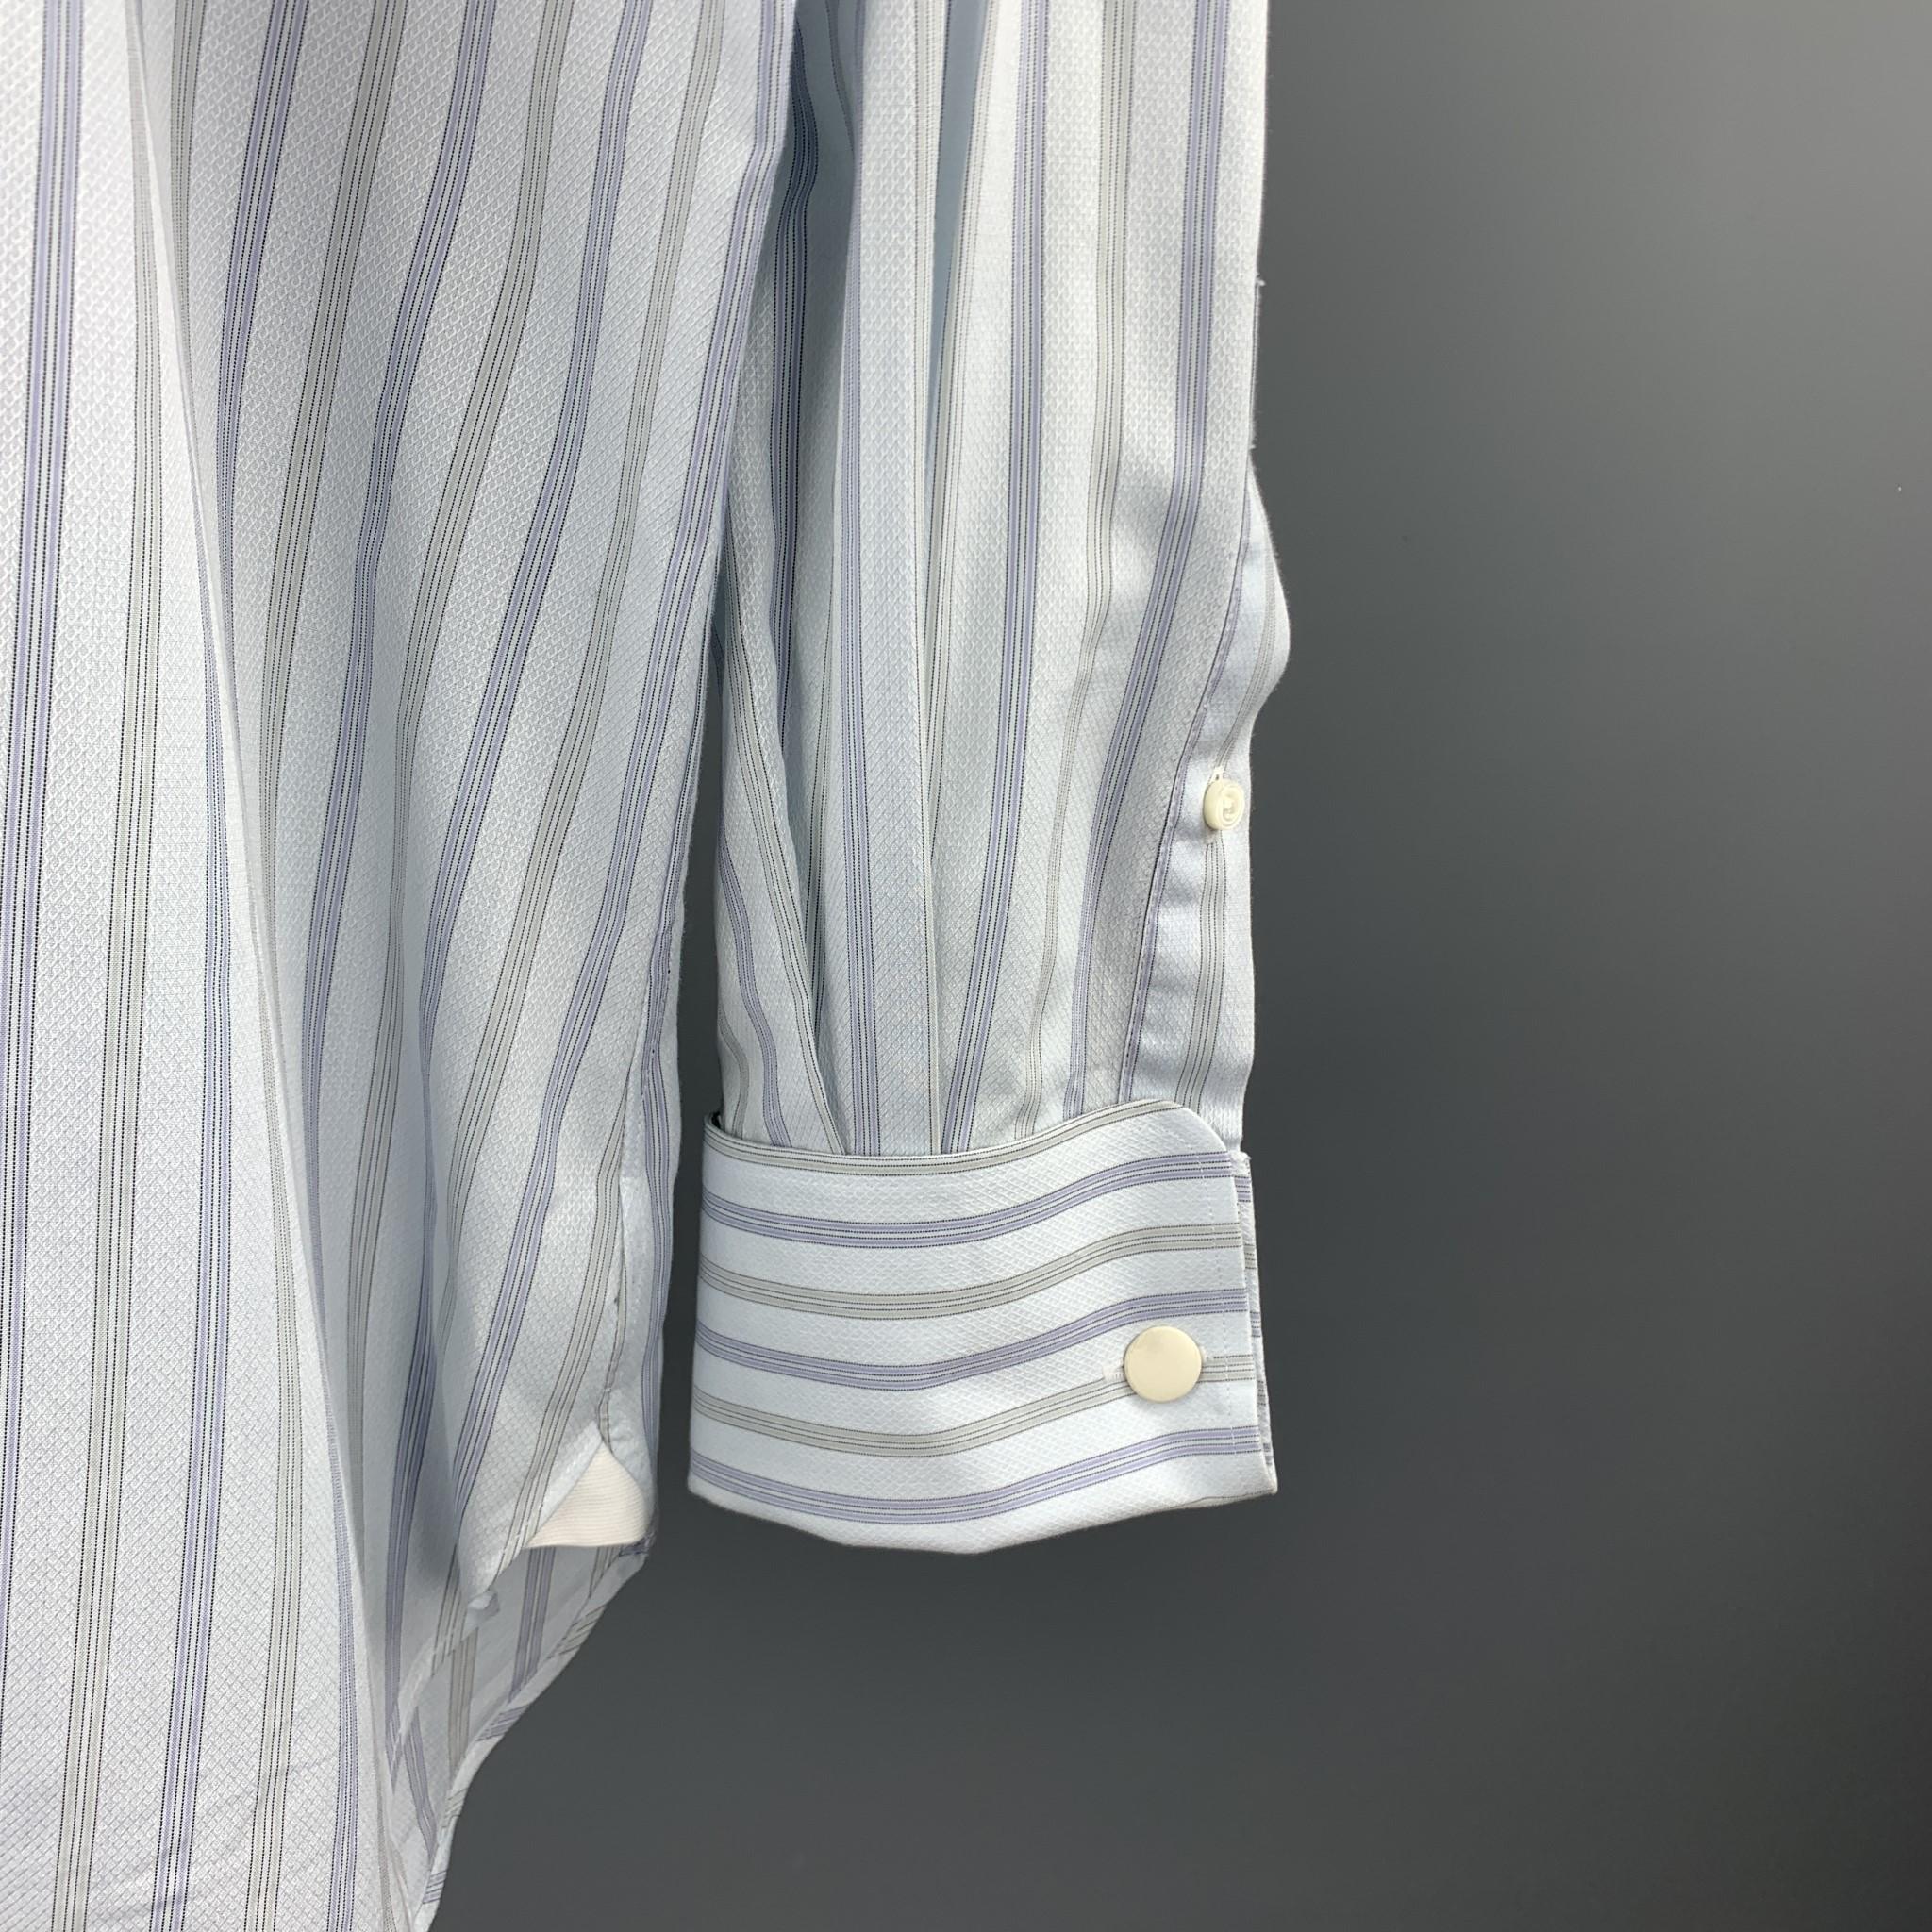 ERMENEGILDO ZEGNA long sleeve shirt comes in a light gray stripe cotton featuring a button up style, french cuffs, and a spread collar. Cufflinks not included. Made in Spain. 

Excellent Pre-Owned Condition.
Marked: 39/15.5

Measurements:

Shoulder: